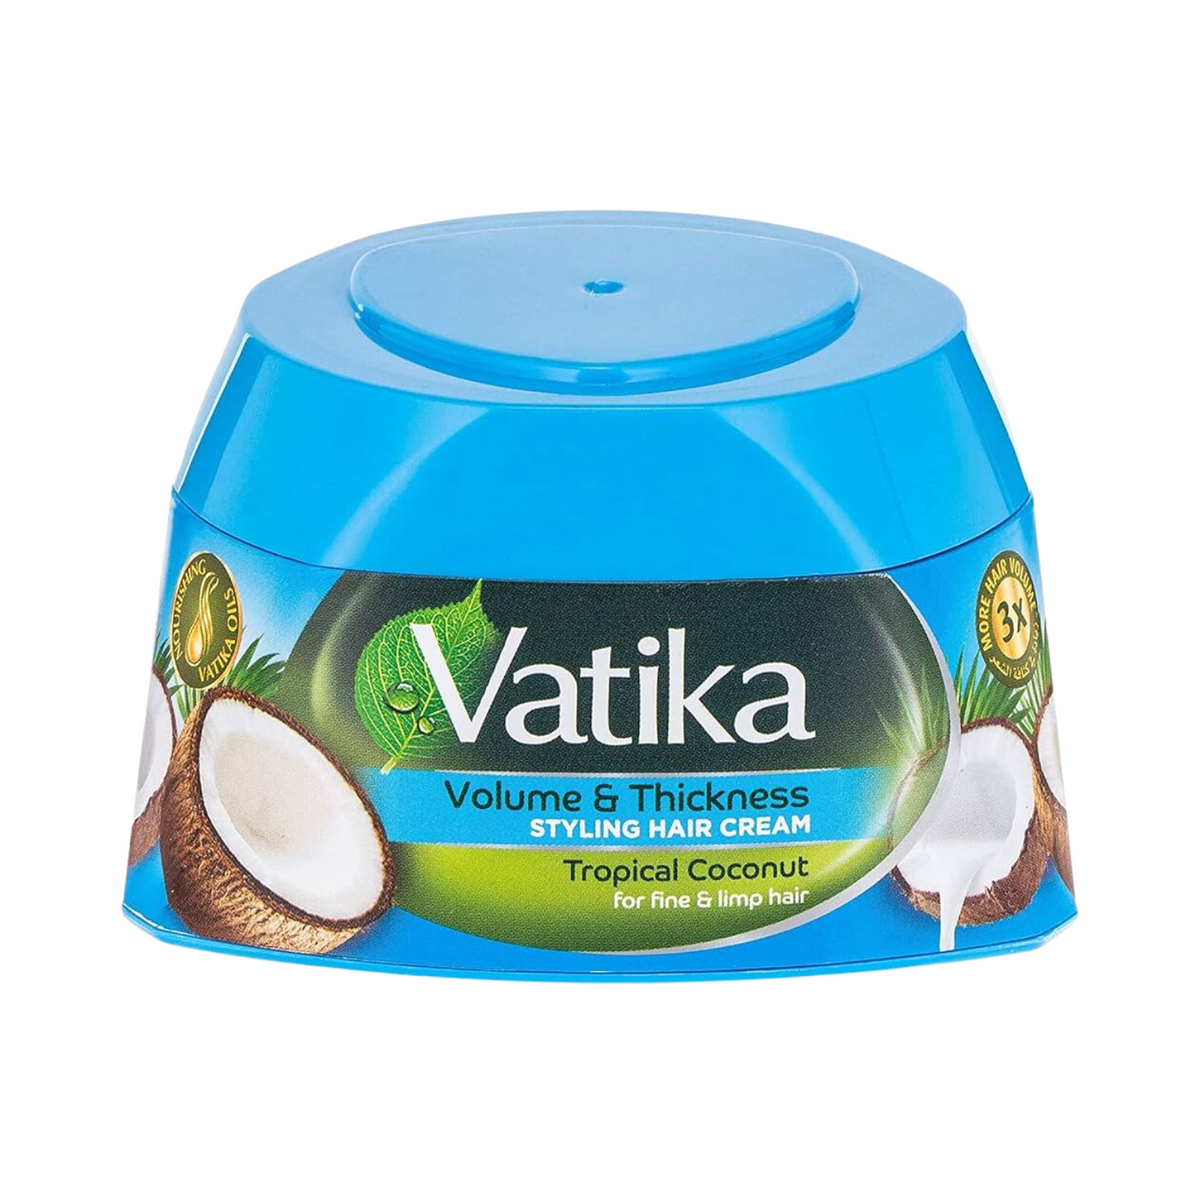 Vatika Volume & Thickness Styling Hair Cream with Tropical Coconut for fine & limp hair 140ml